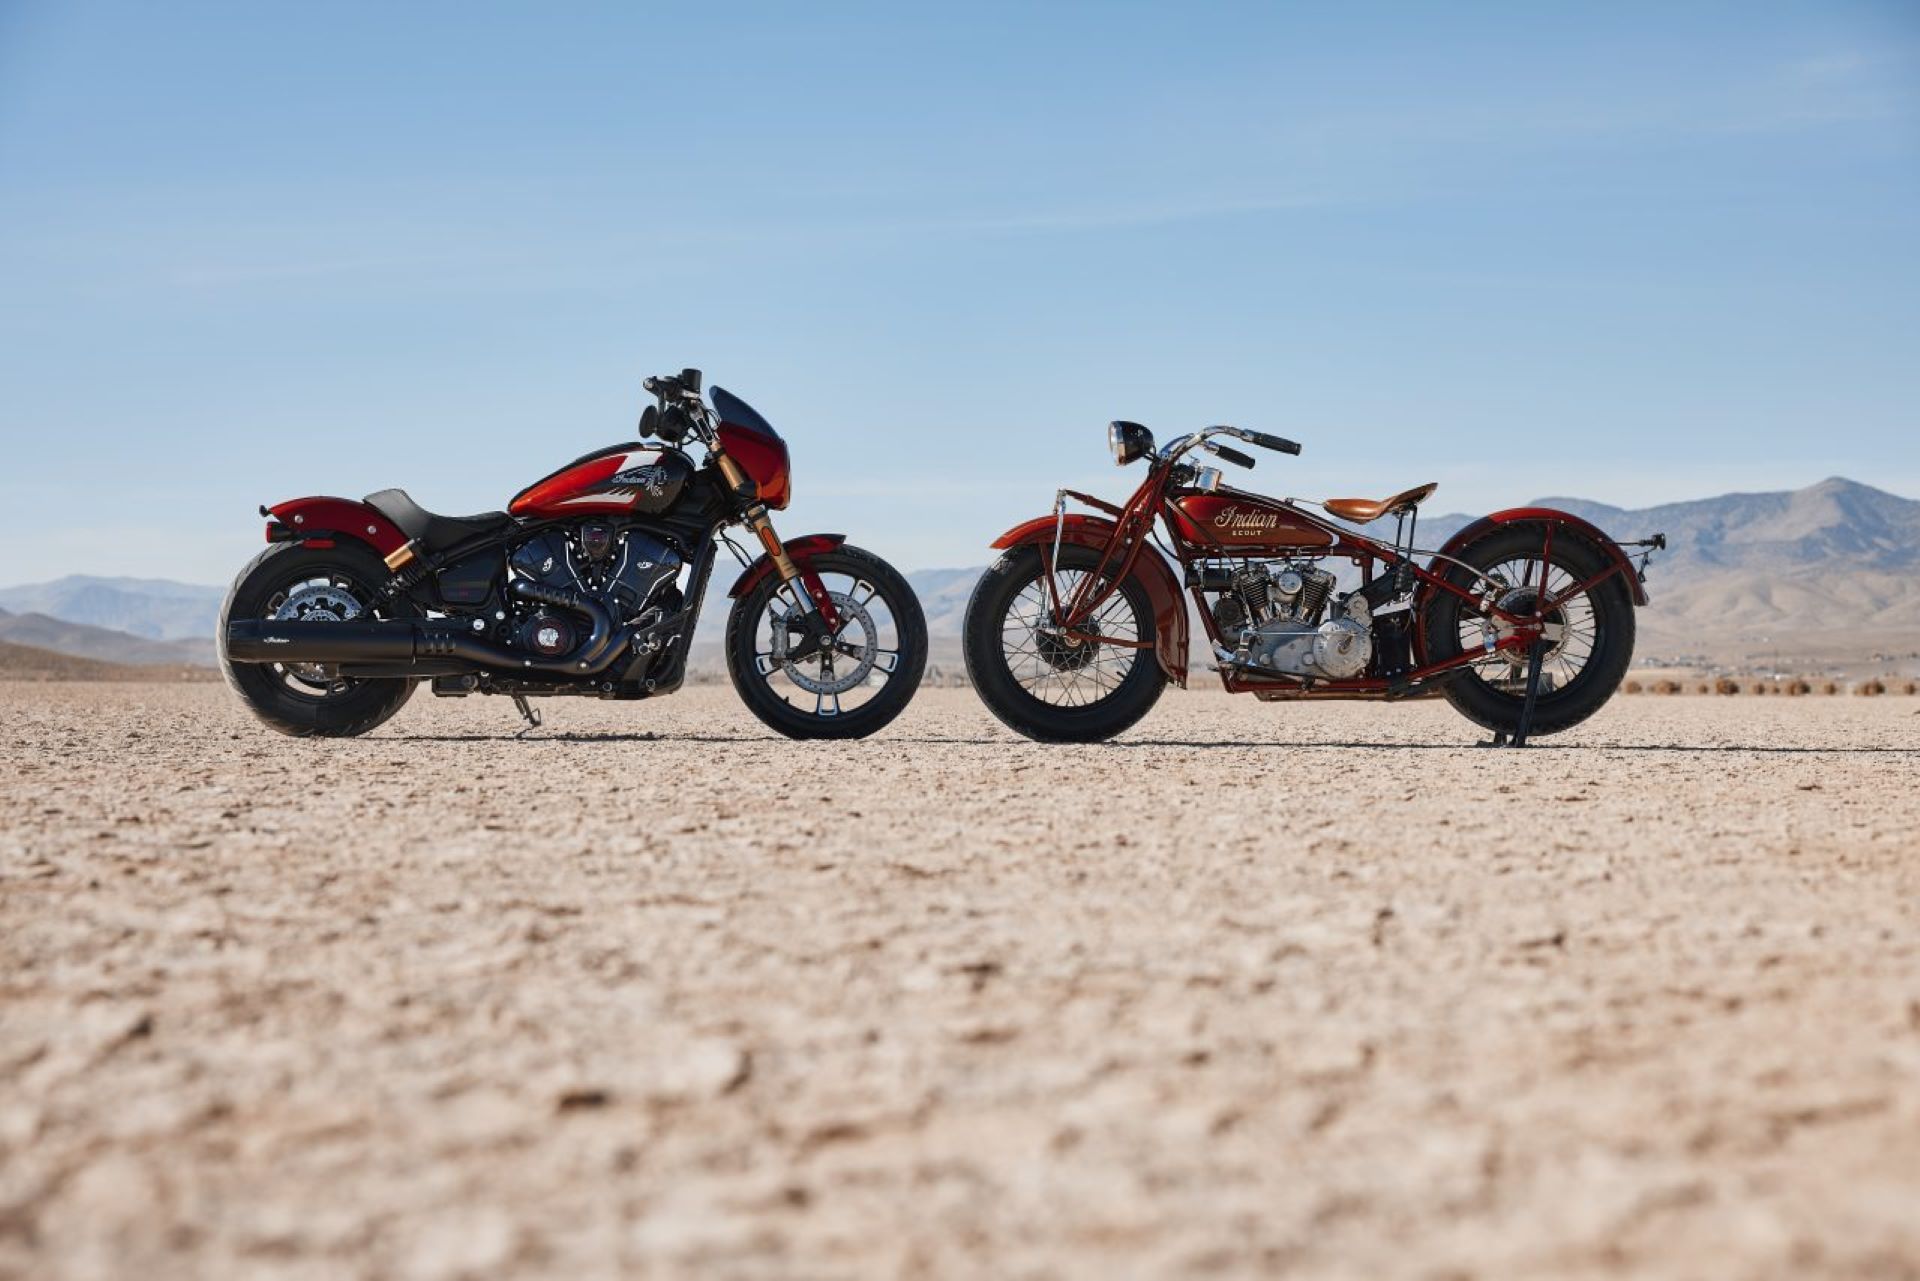 Revitalizing a Legend: The 2025 Indian Scout Rides into the Future